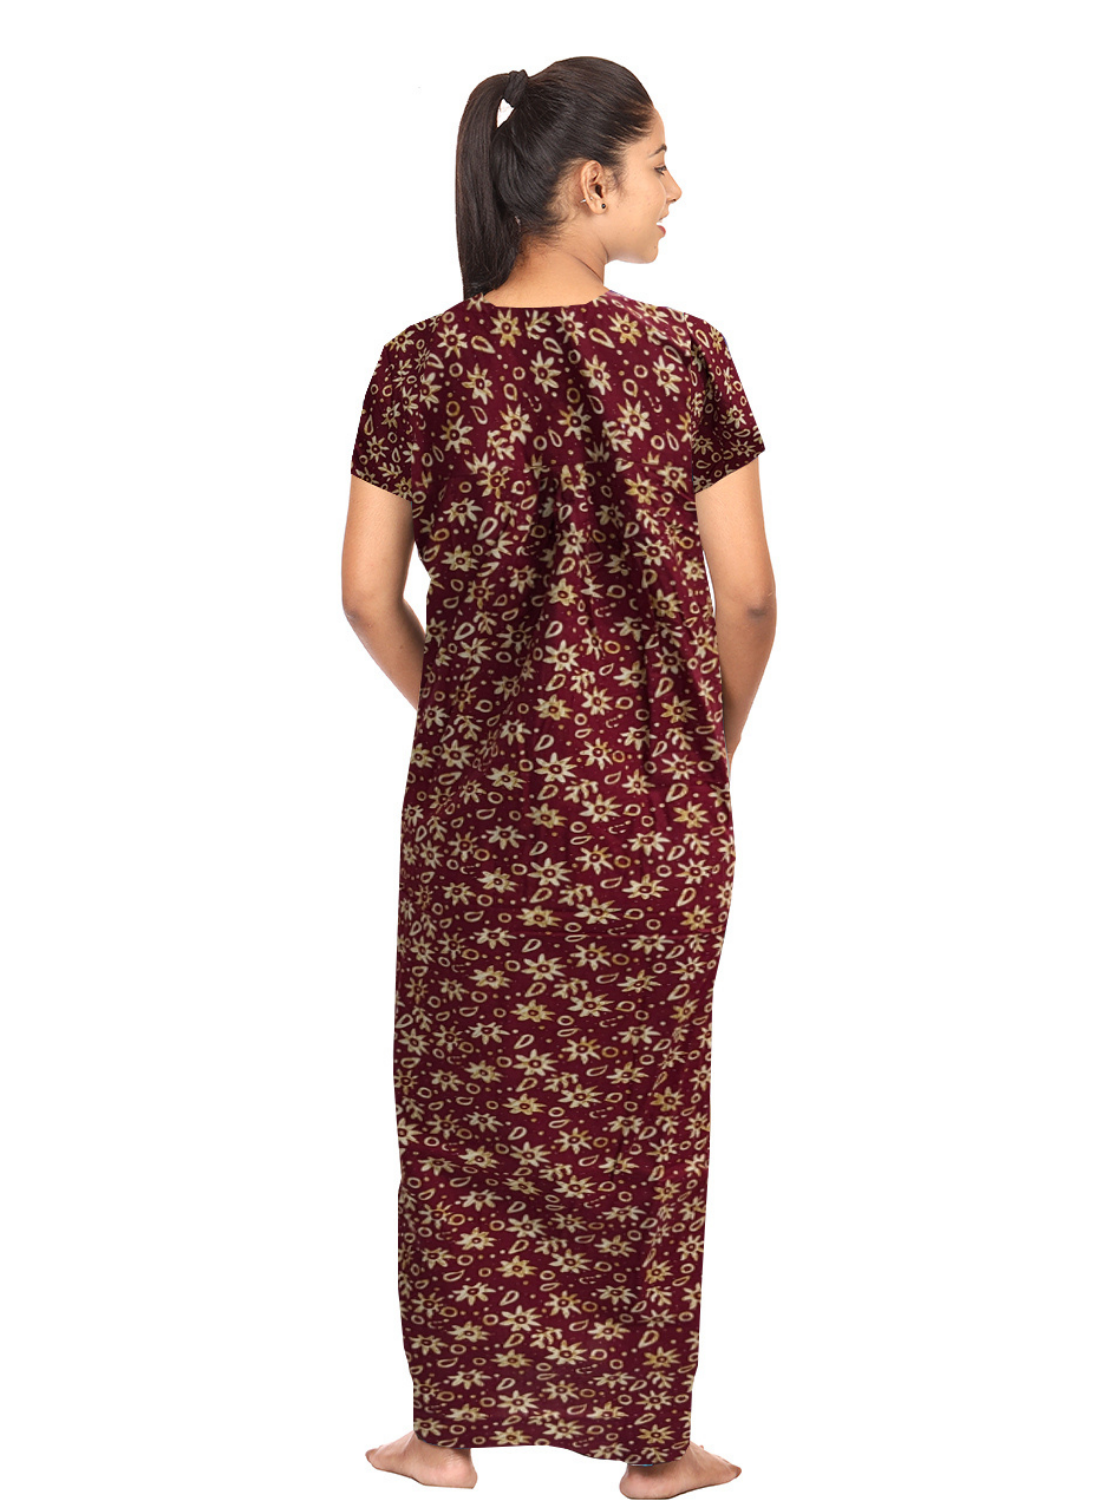 MANGAI Cotton Printed PLEATED Model Nighties - Fancy Neck | With Side Pocket |Shrinkage Free Nighties | Trendy Collection's for Trendy Women's